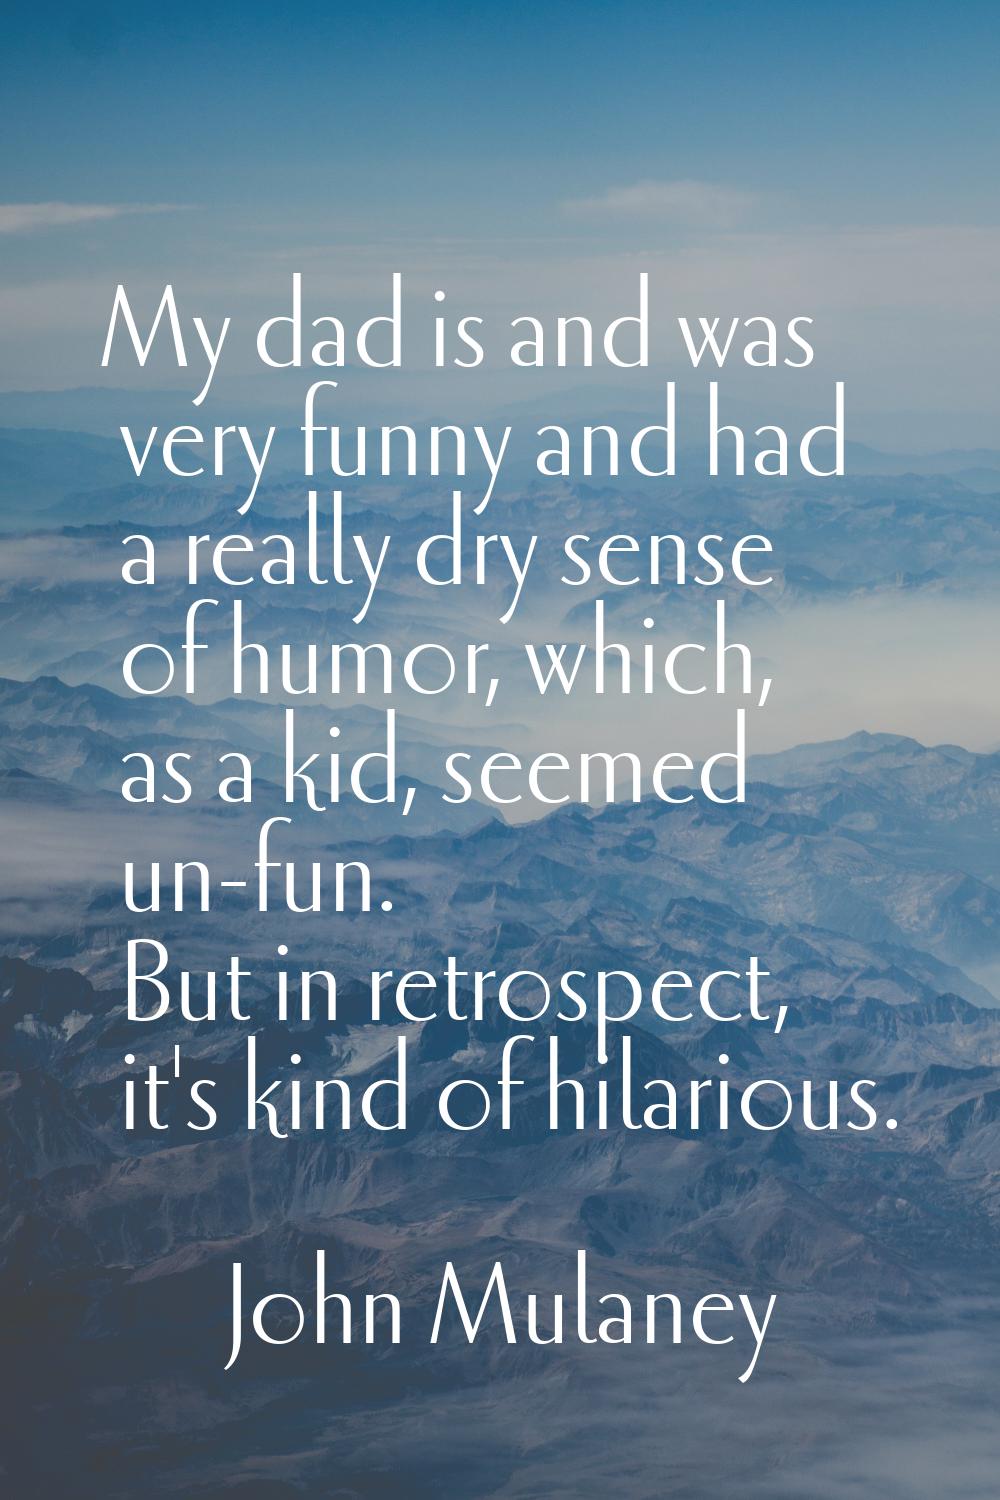 My dad is and was very funny and had a really dry sense of humor, which, as a kid, seemed un-fun. B